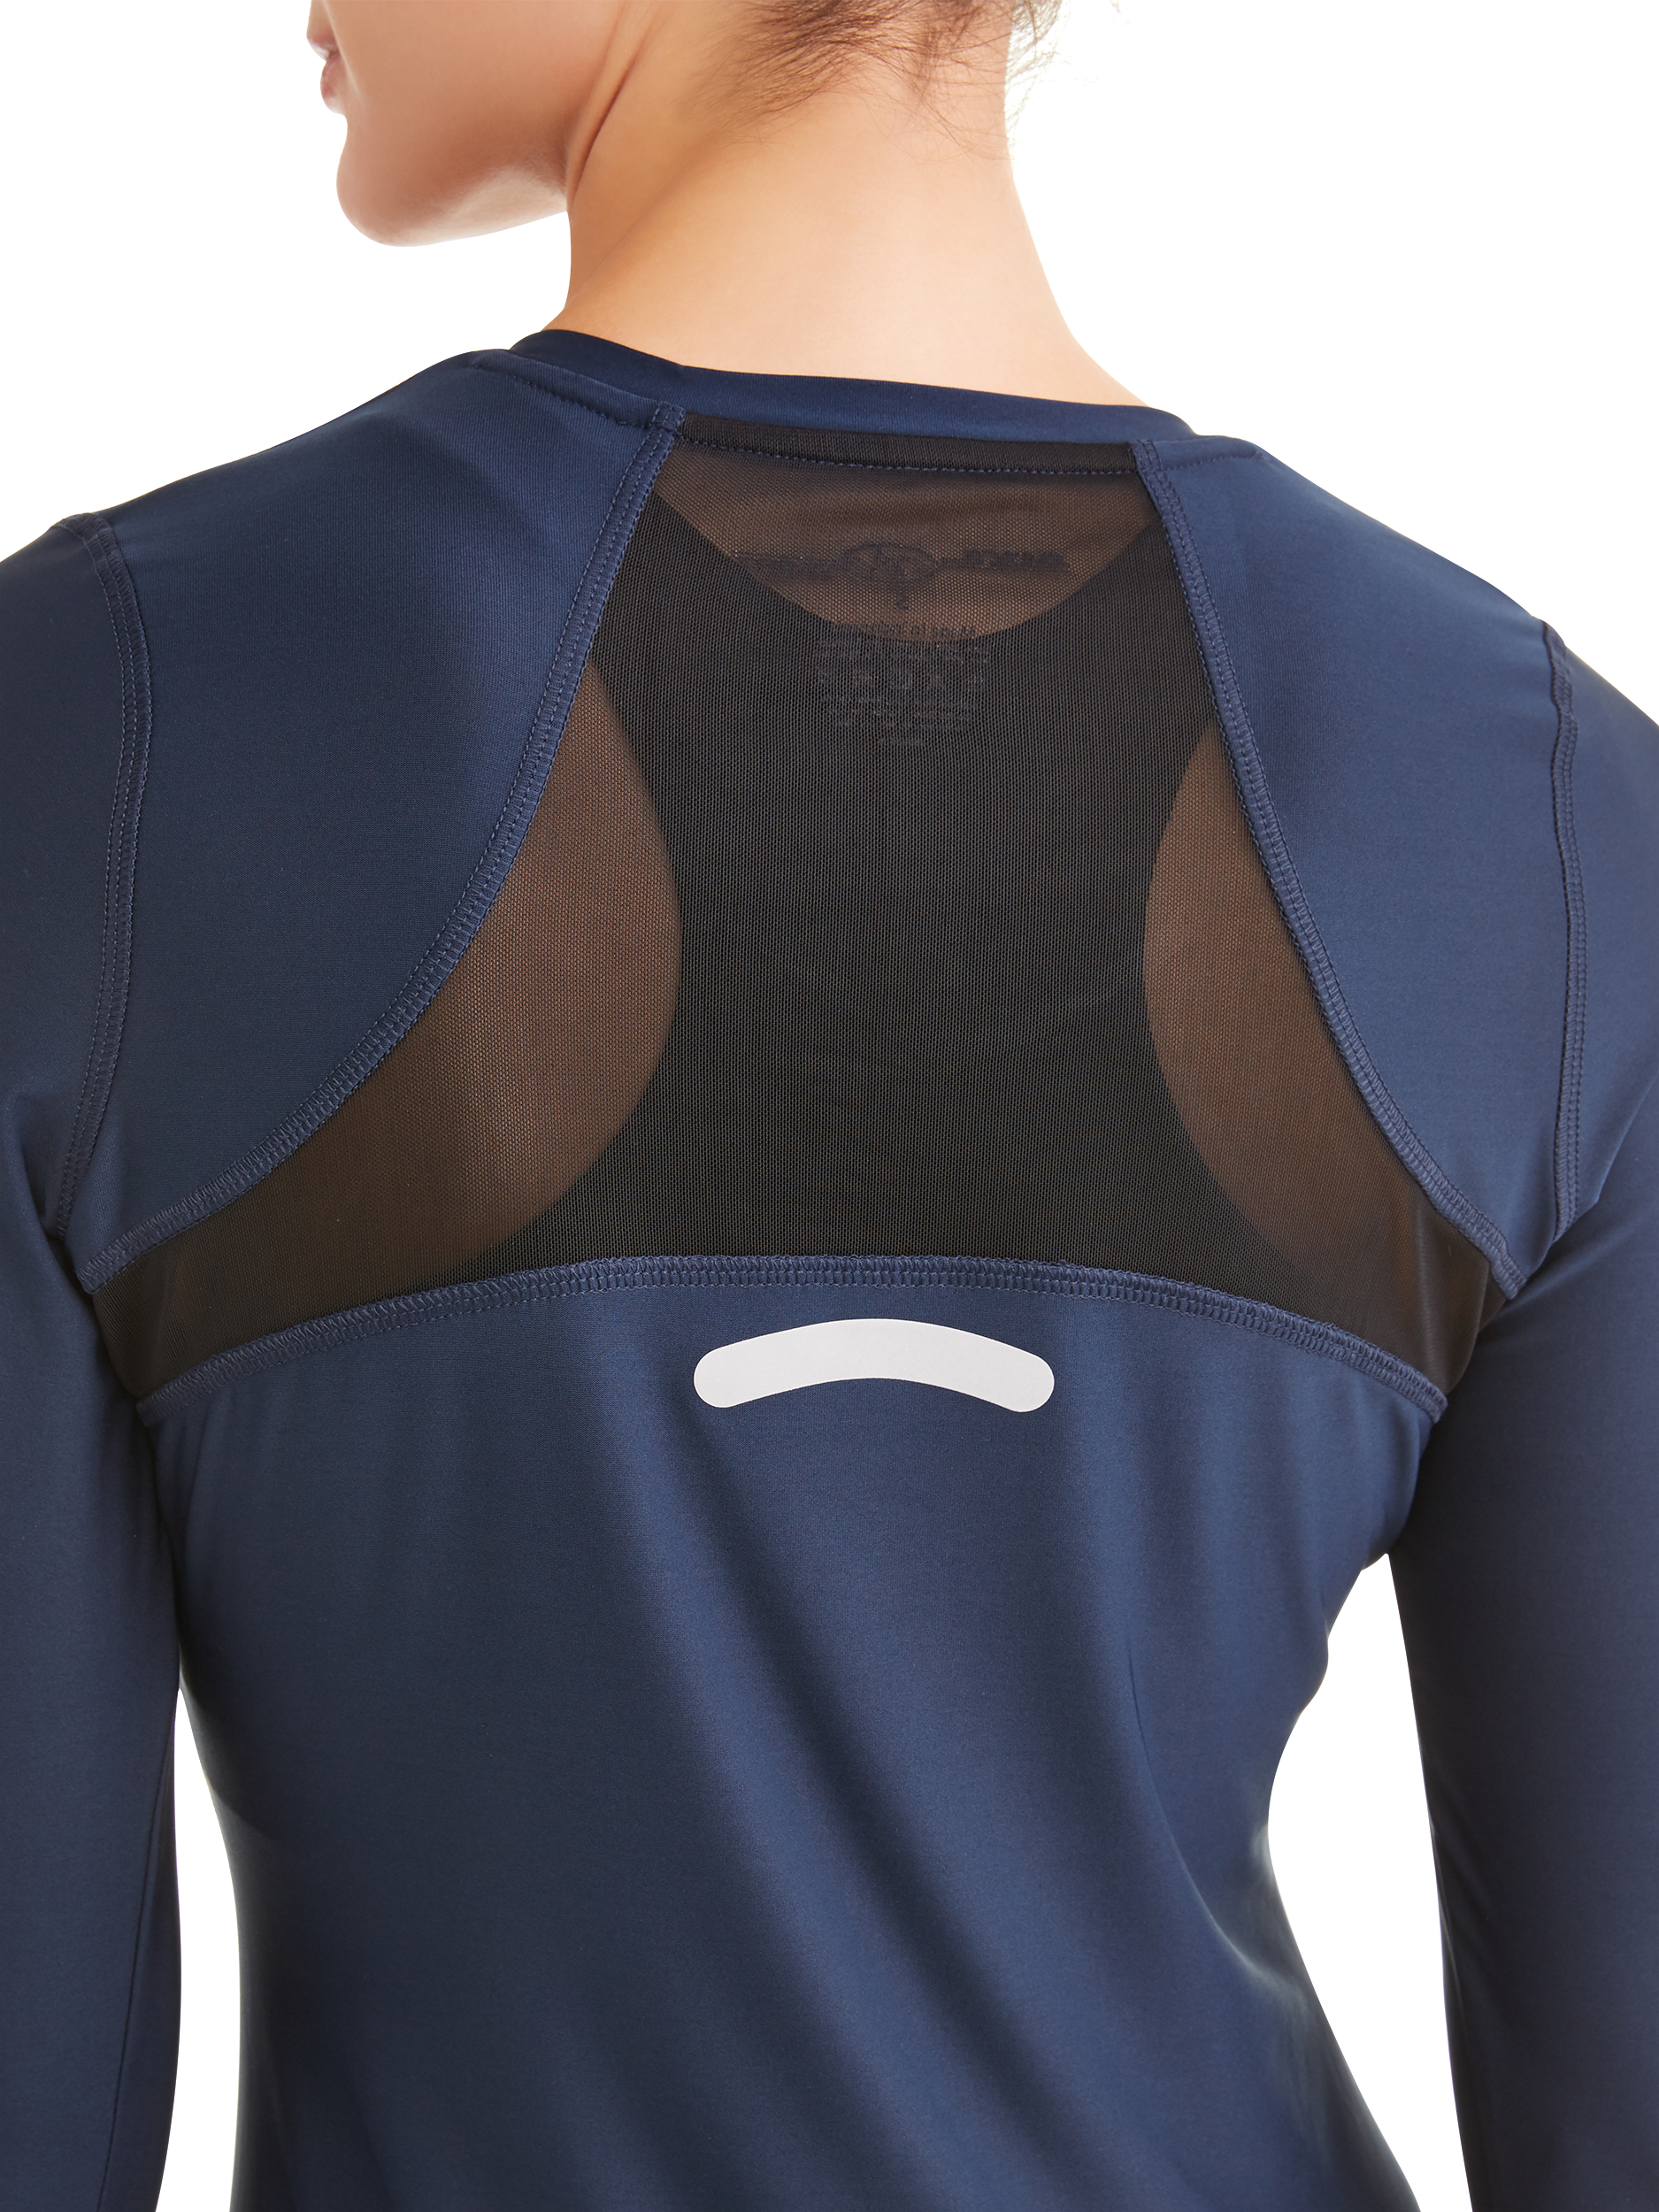 New York Laundry Women’s Active Long Sleeve V-Neck Mesh Top - image 4 of 4